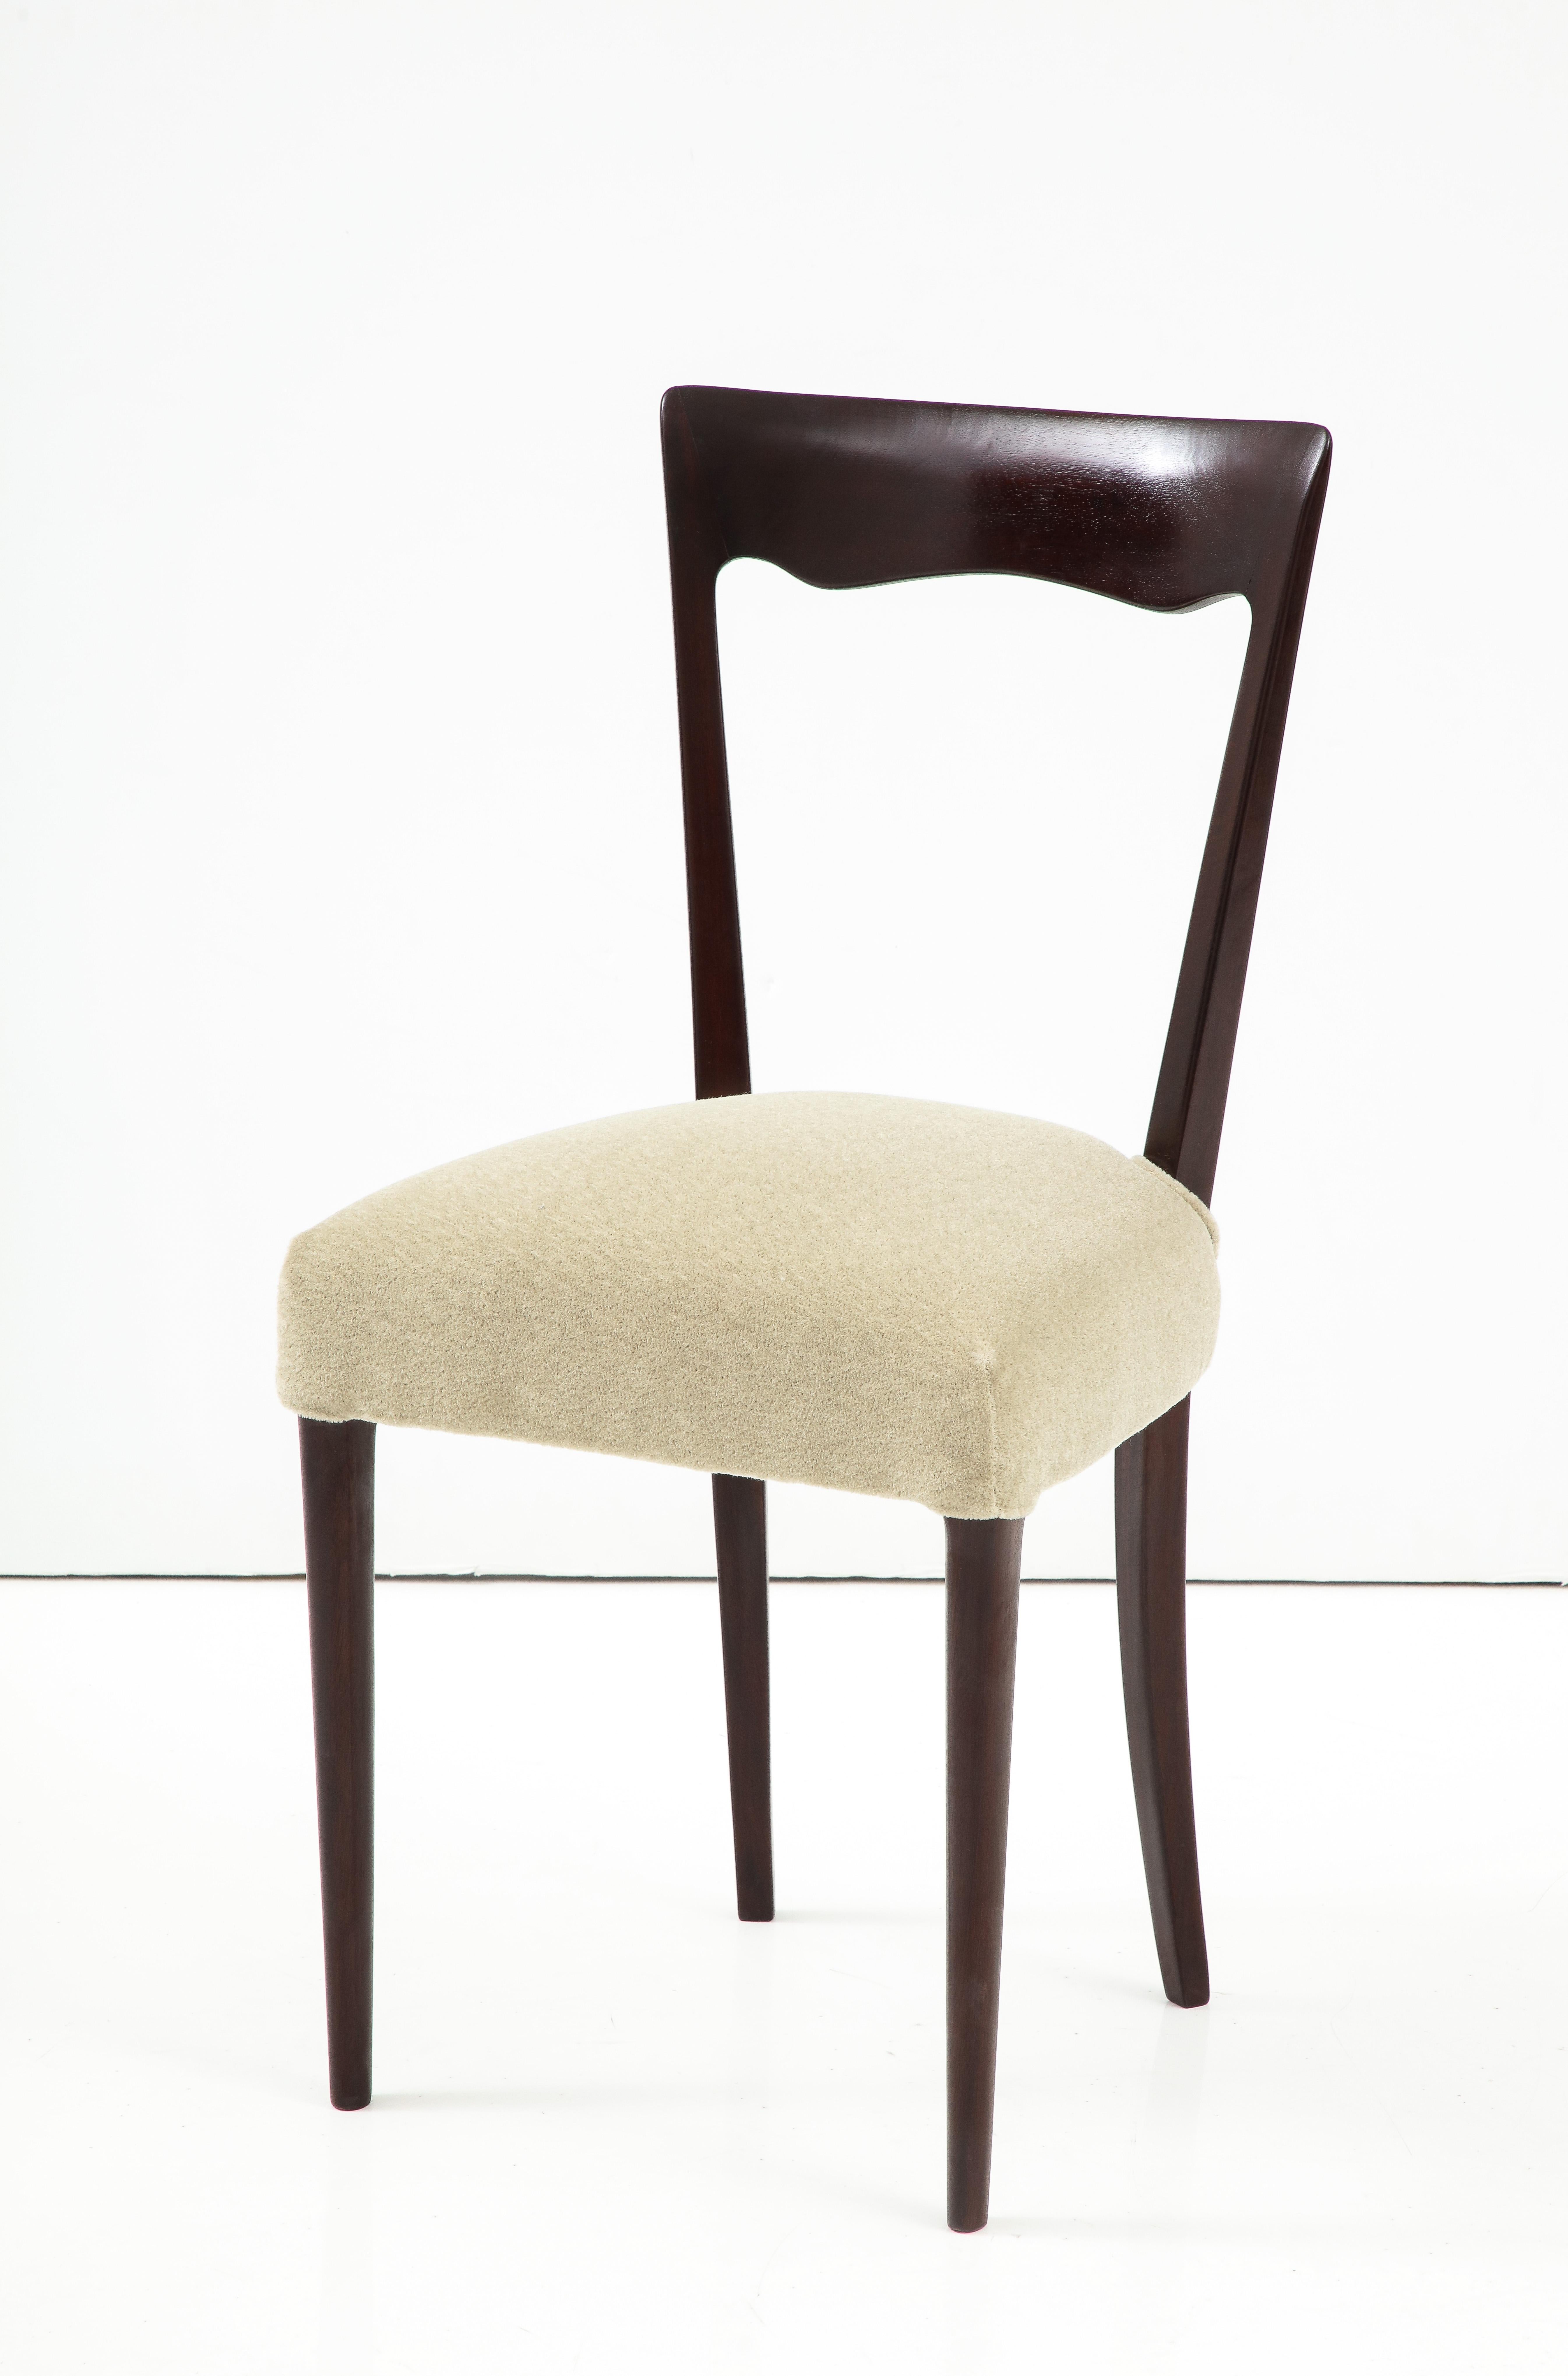 1950's Modernist Italian Dining Chairs In Mohair Upholstery 8